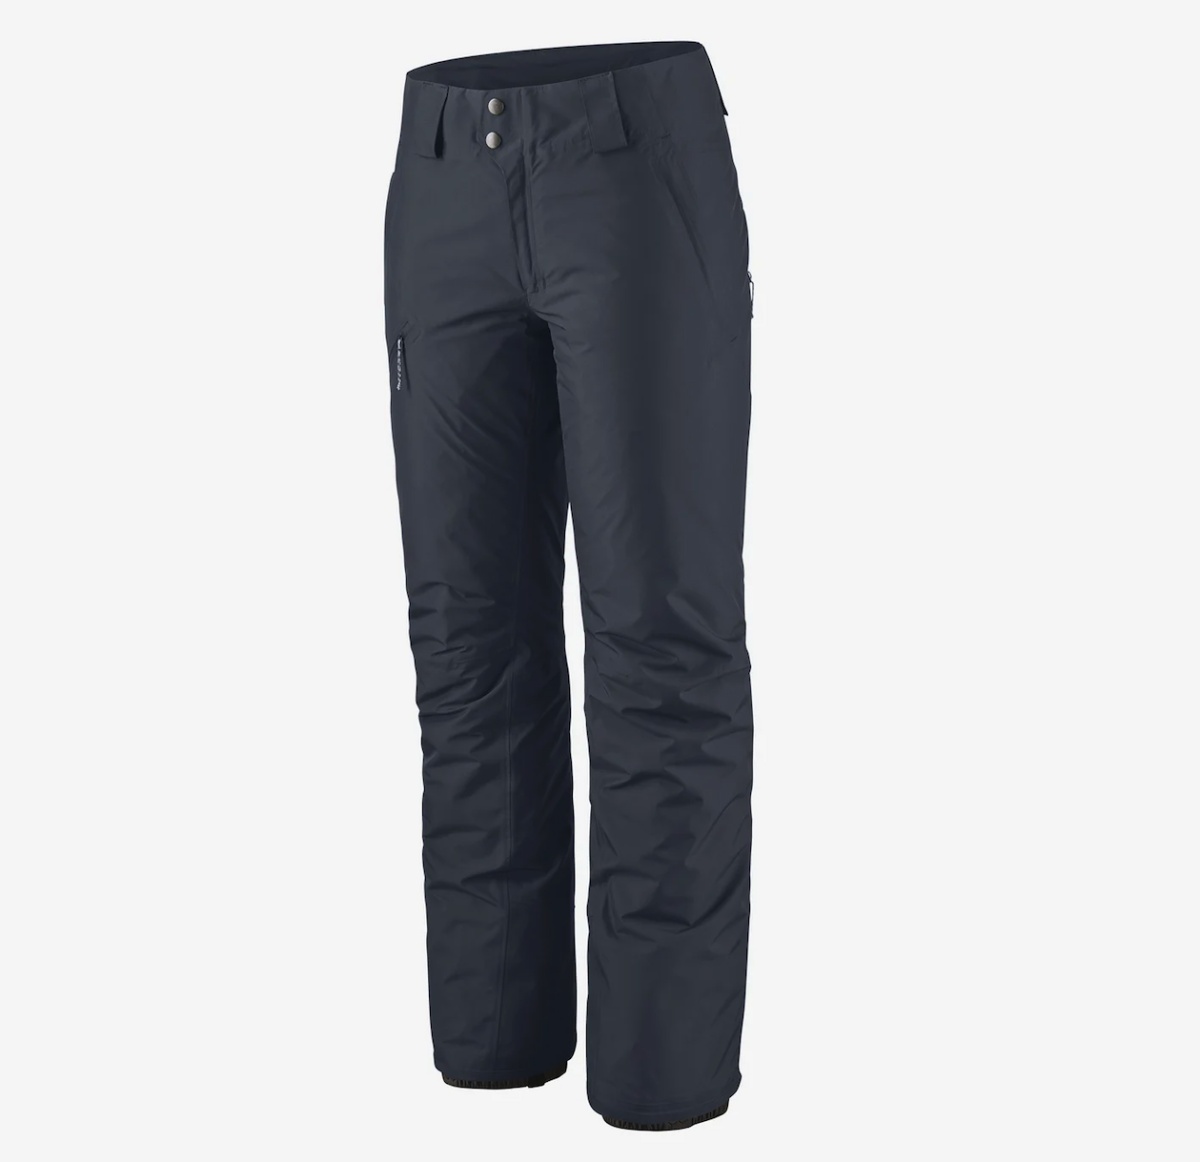 patagonia insulated powder town pants for women ski pants review